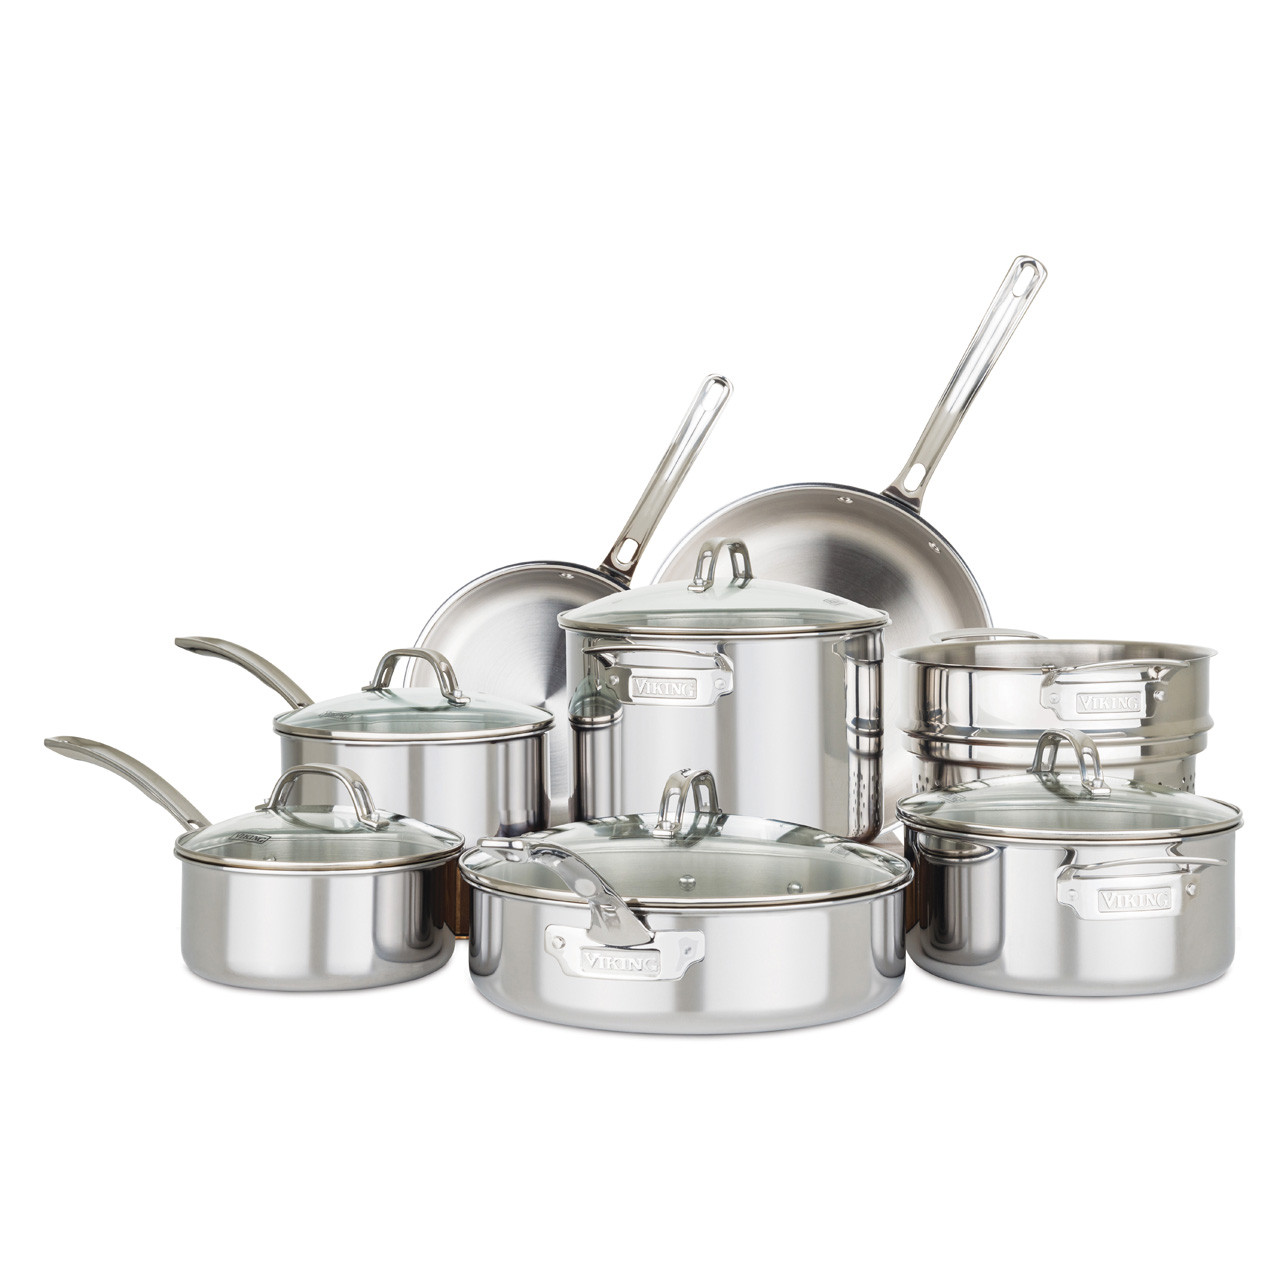 BergHOFF Essentials 18/10 Stainless Steel 15Pc Cookware Set, Hotel